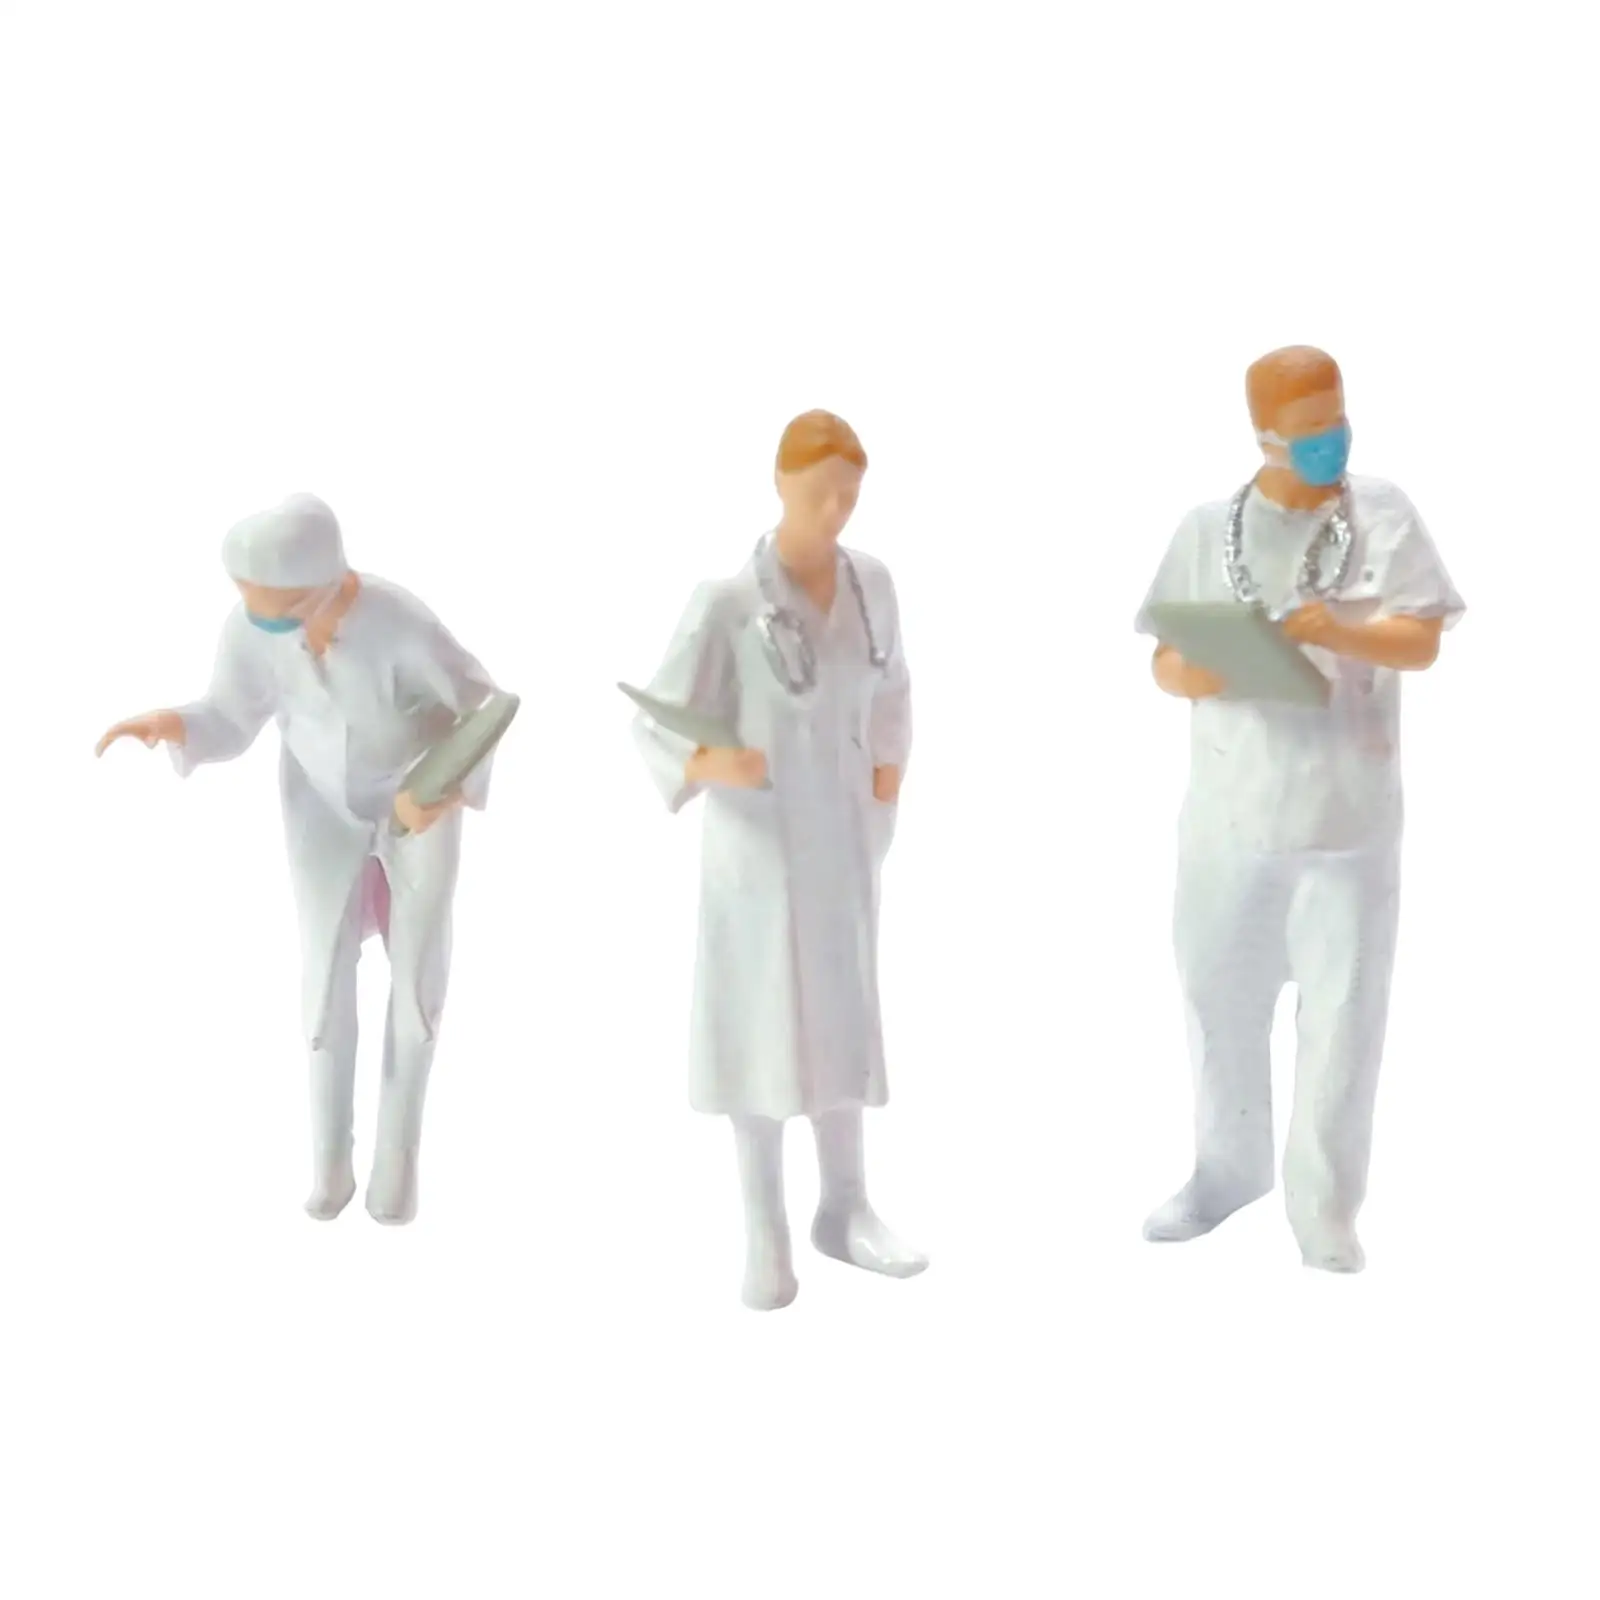 3Pcs 1:87 People Figurines Set People Models for Miniature Scenes Collection